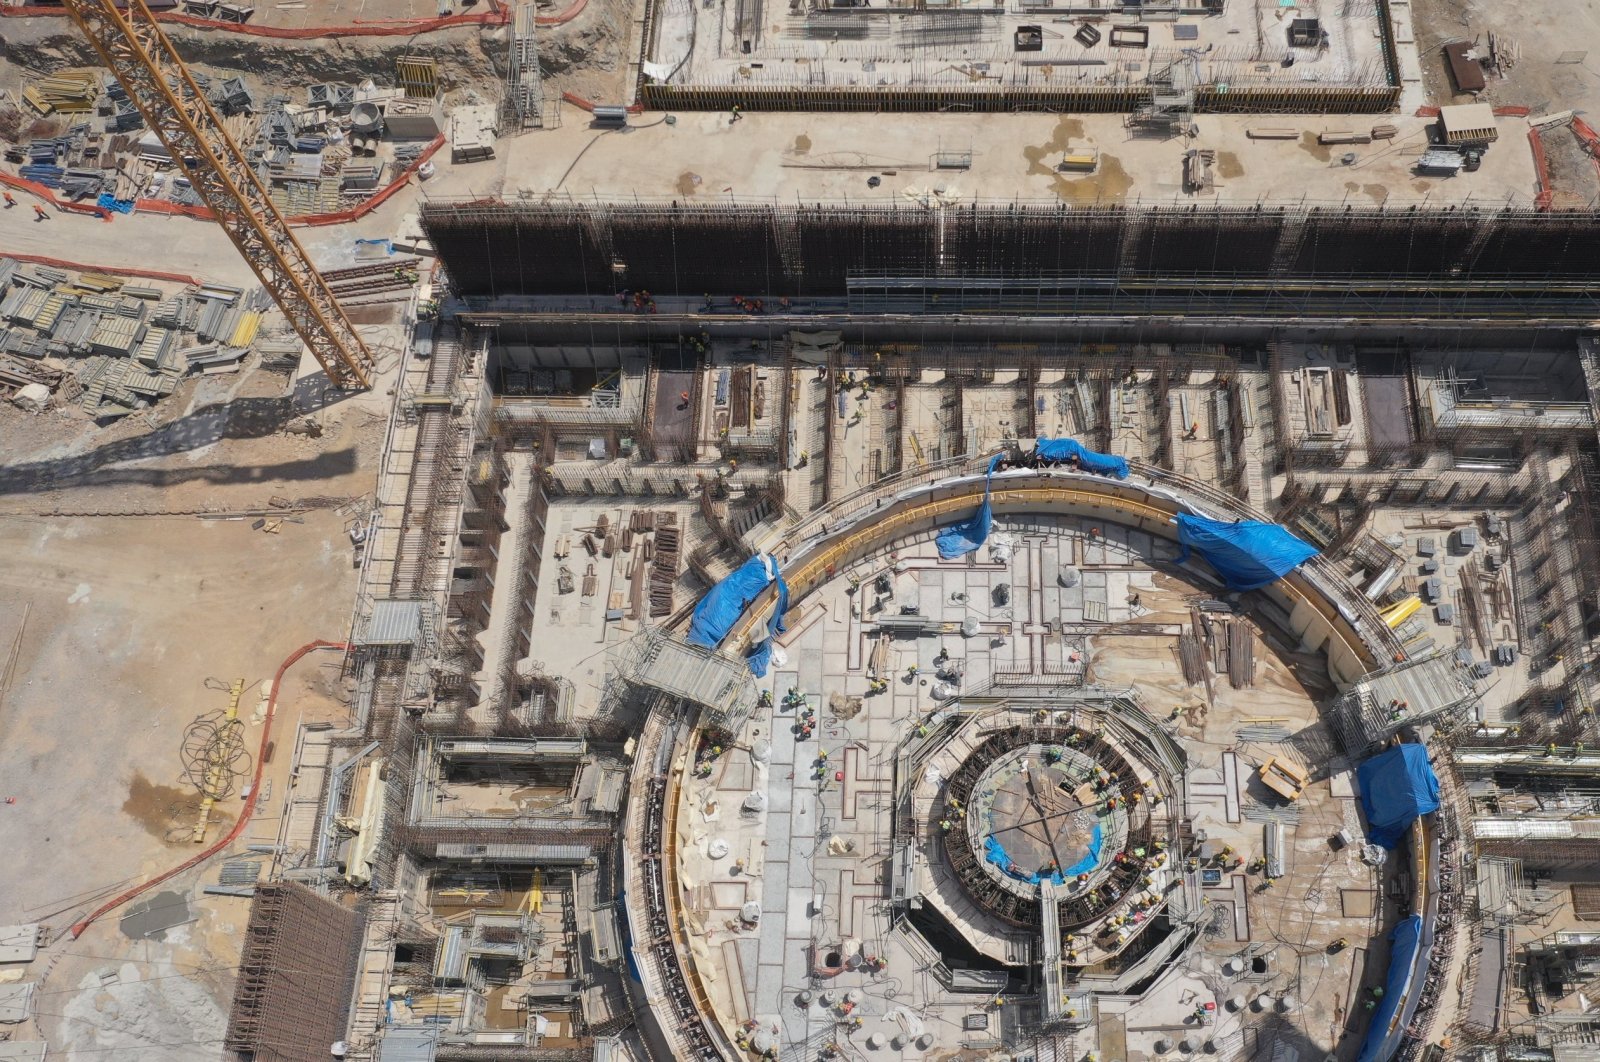 An aerial view showing the construction site of the Akkuyu NPP, Mersin, southern Türkiye, June 26, 2020. (Energy and Natural Resources Ministry via AA)